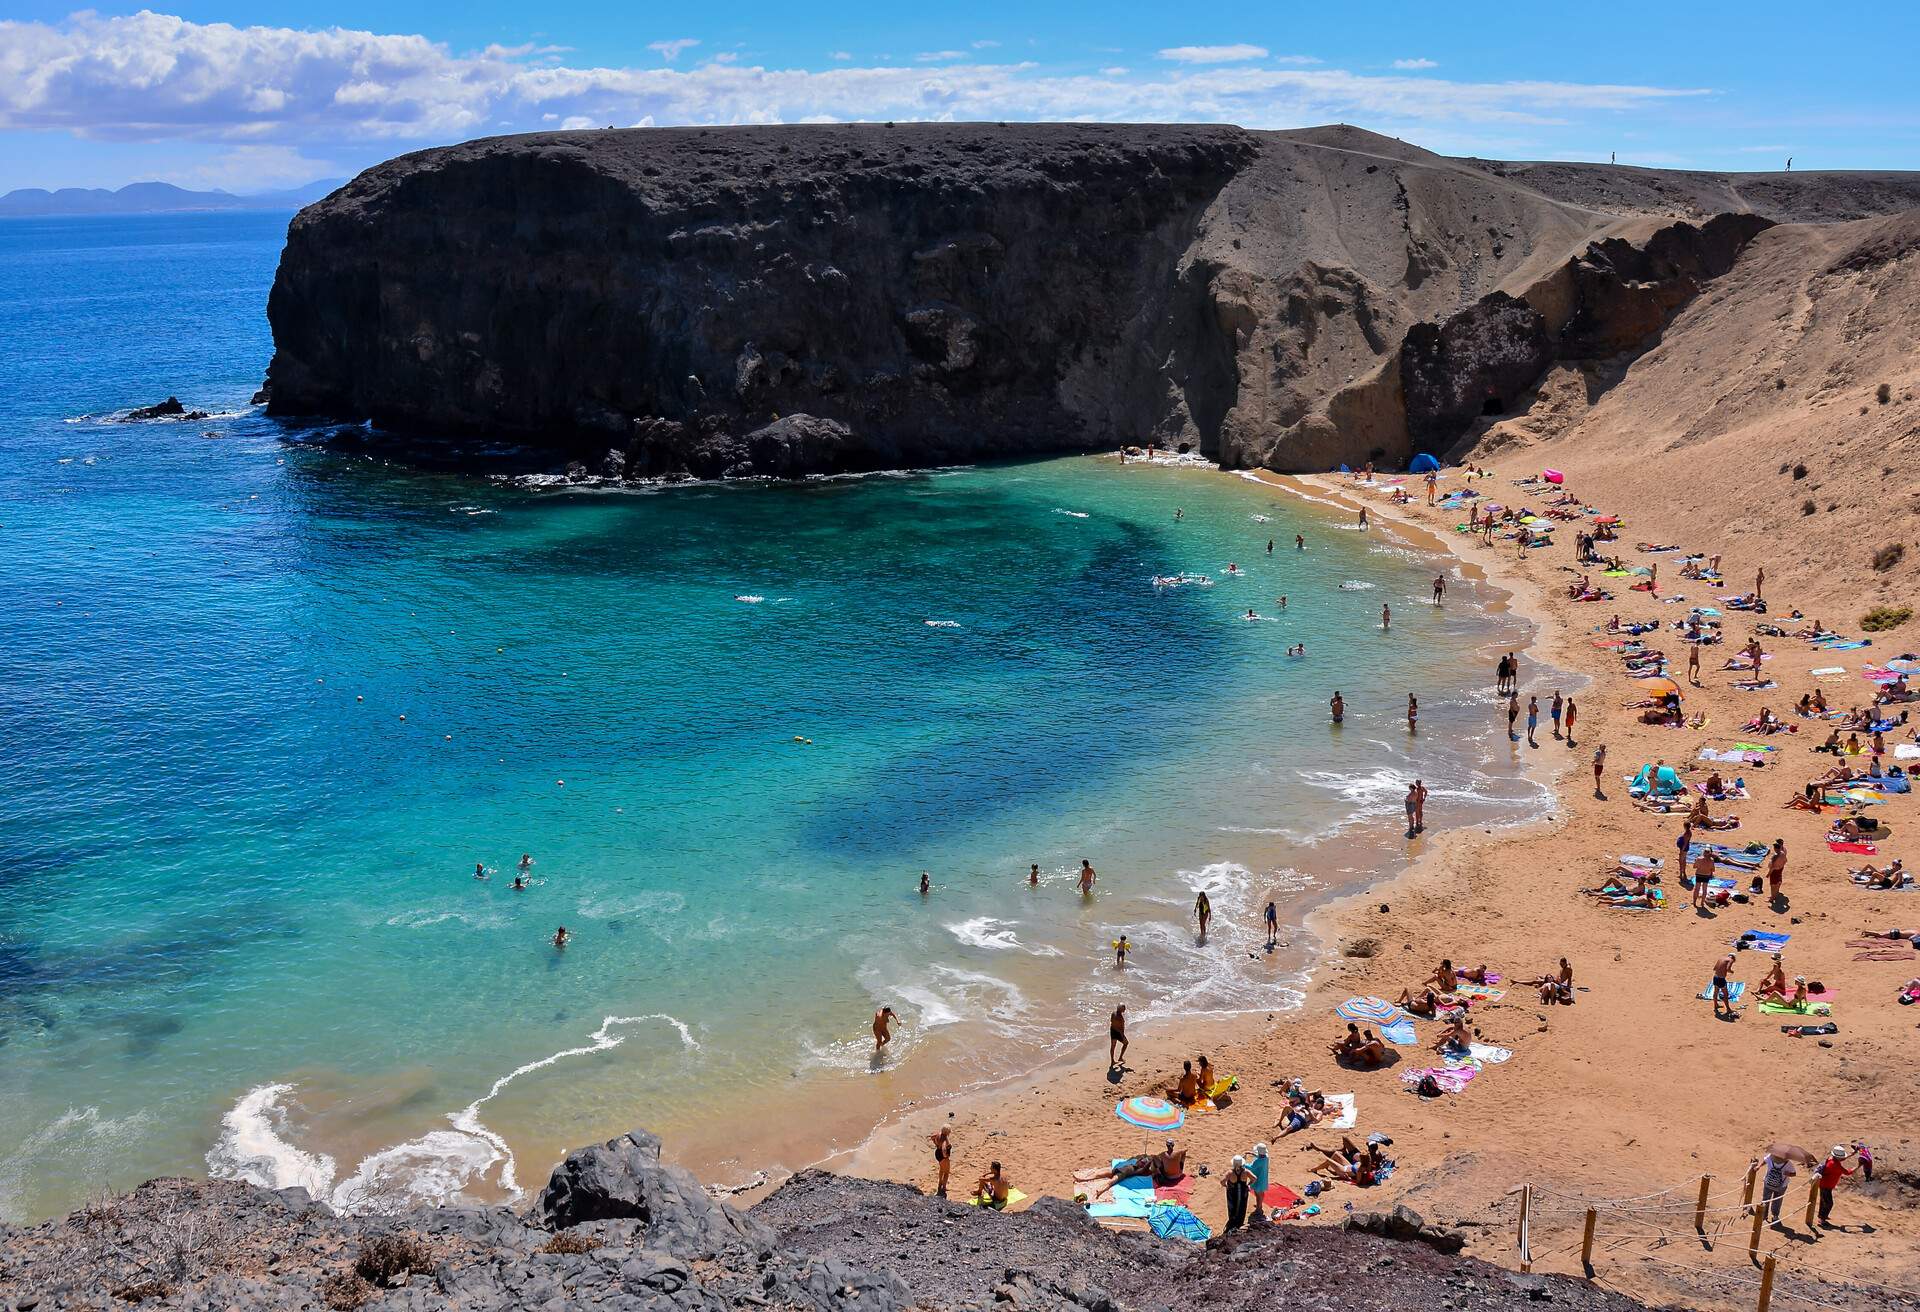 Spanish View Landscape in Papagayo Playa Blanca Lanzarote Tropical Volcanic Canary Islands Spain